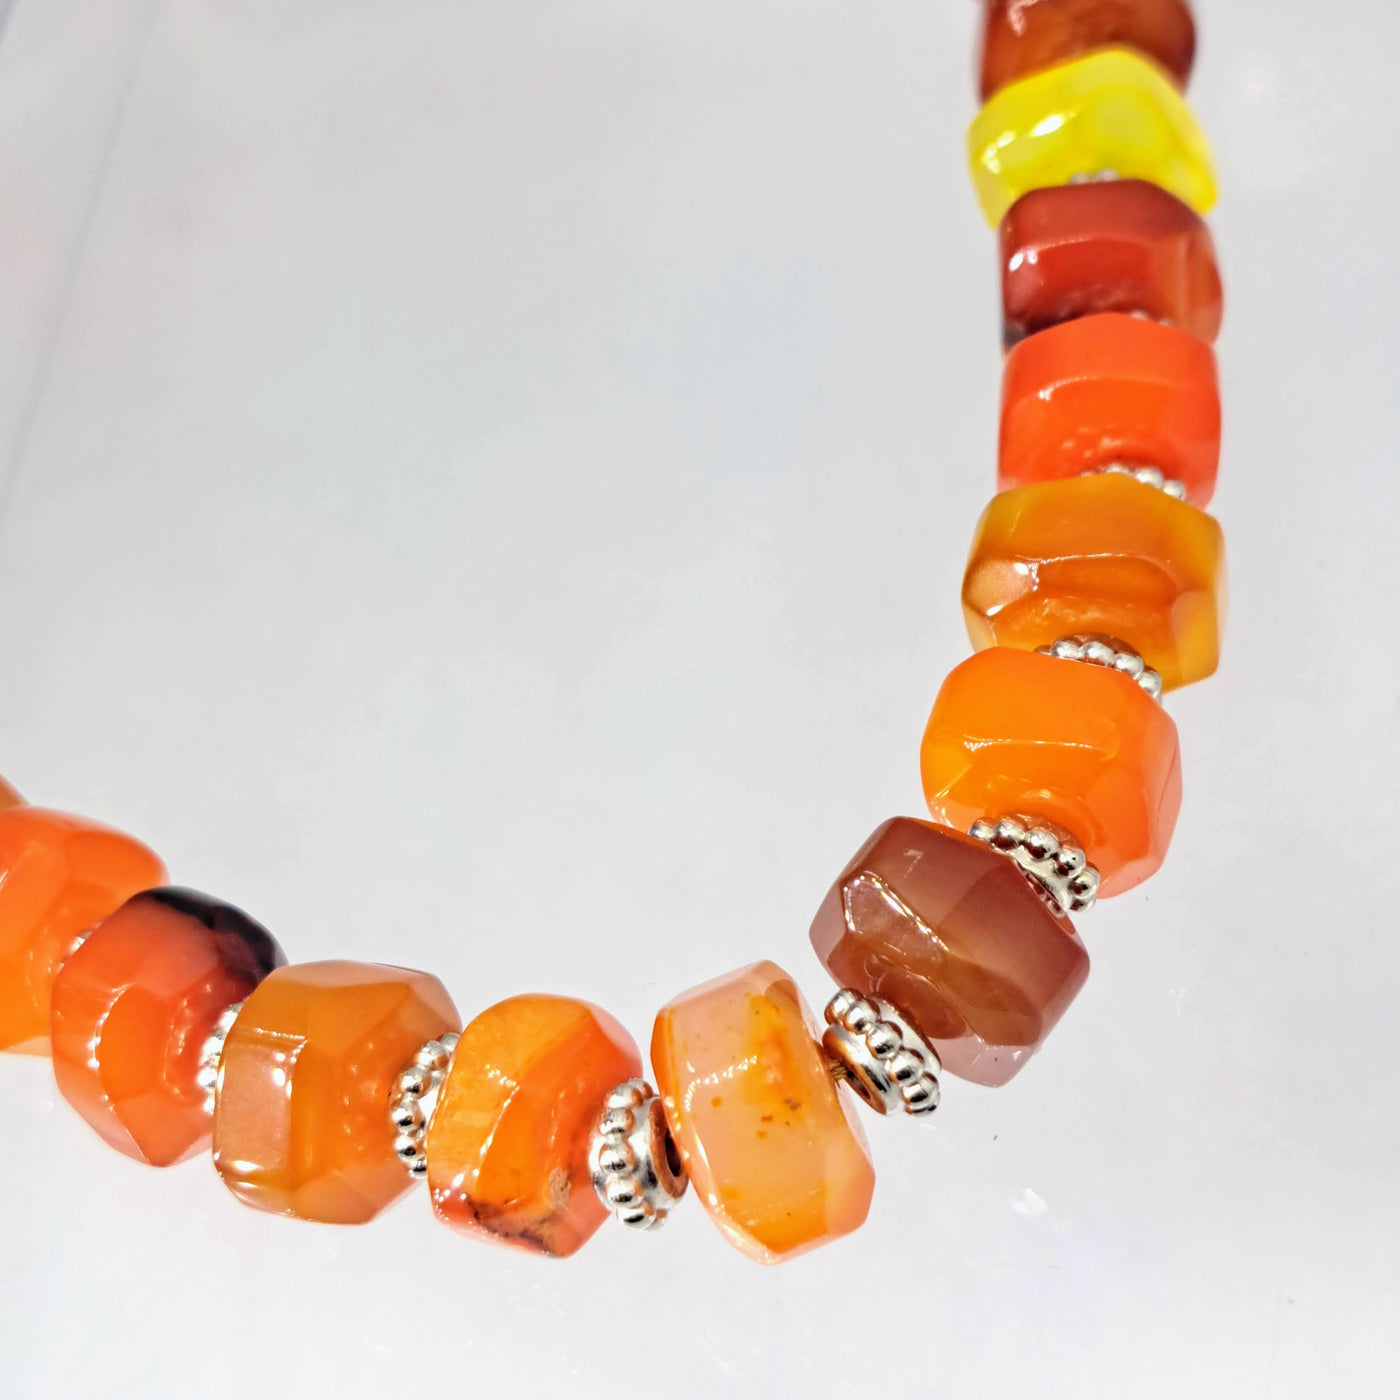 "Tropical Punch!" 20-22" Necklace - Carnelian, Sterling